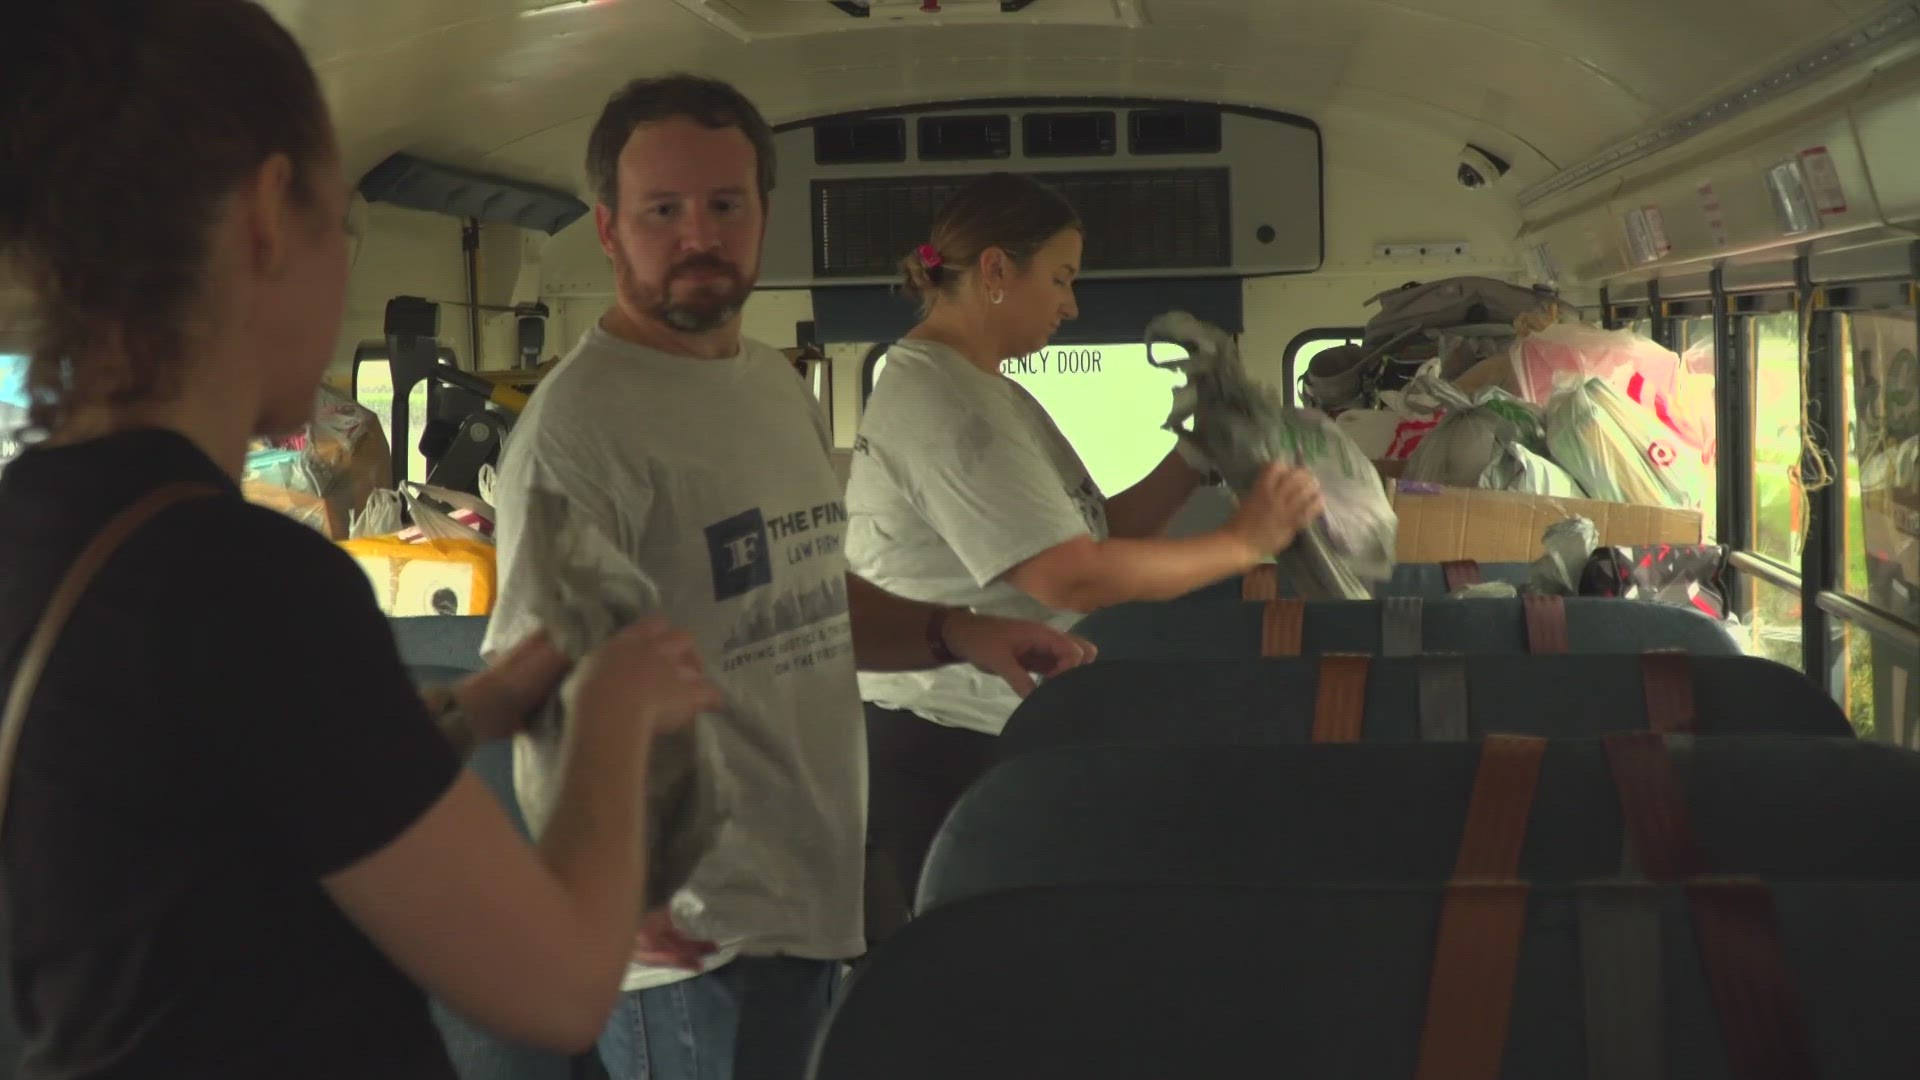 First Coast News thanks all who contributed toward the Stuff the Bus event on Friday. Two buses were loaded with back-to-school classroom supplies for students.